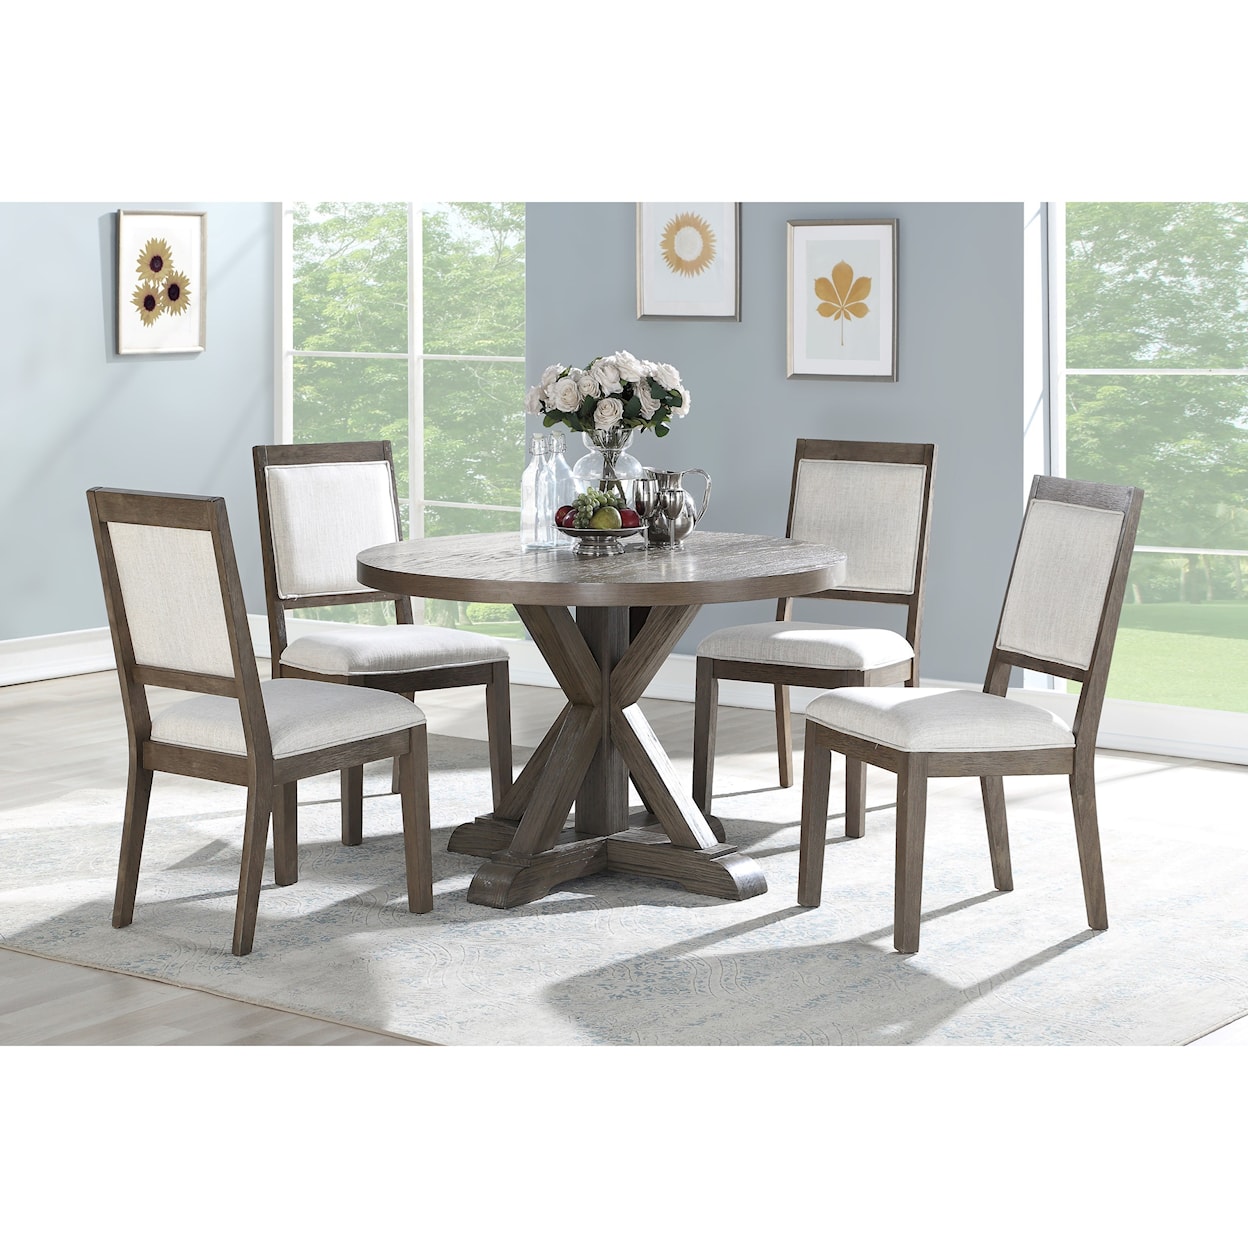 Prime Molly 5 Piece Table and Chair Set